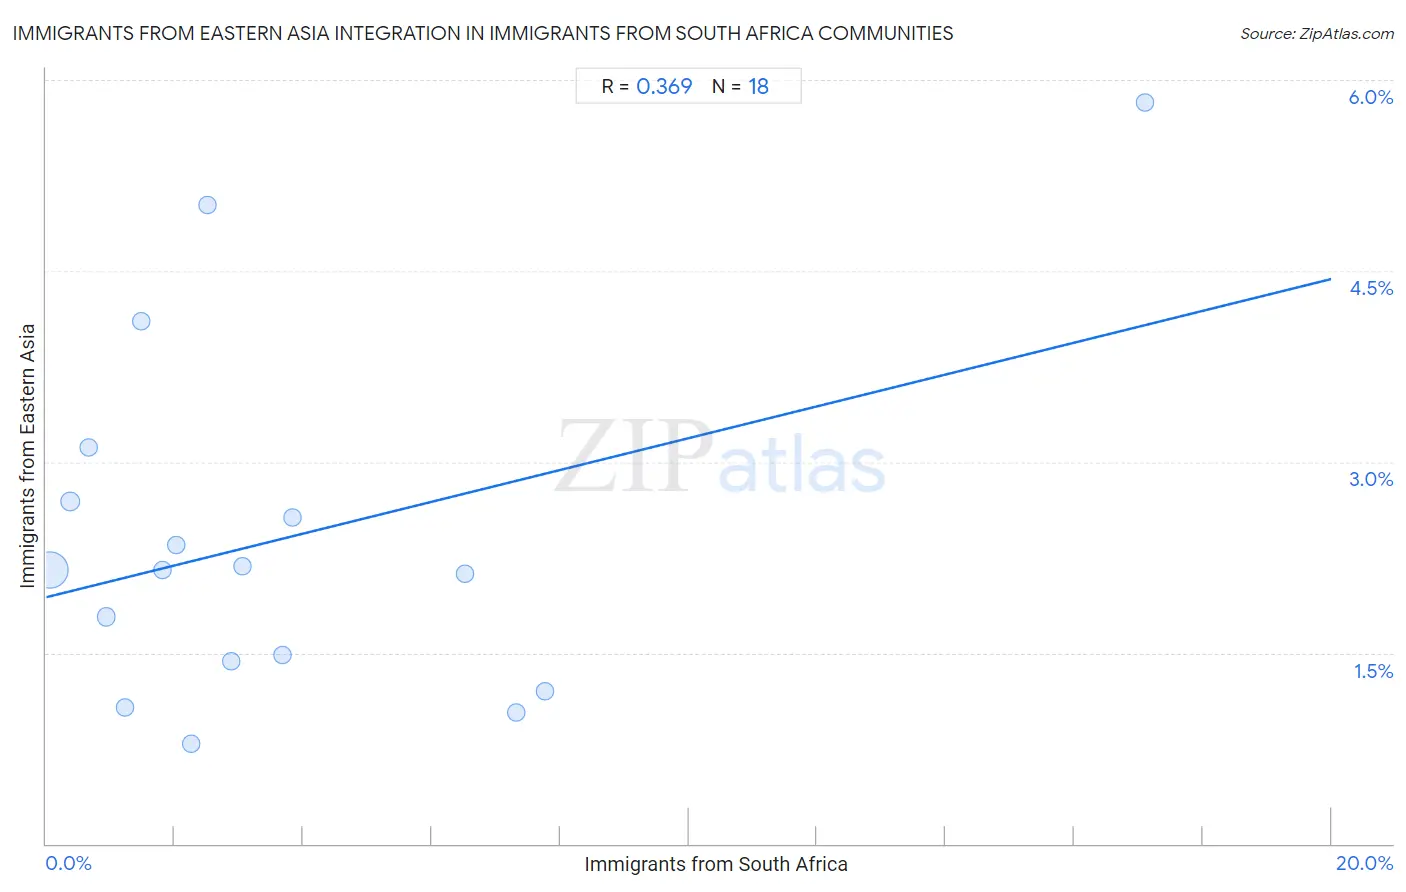 Immigrants from South Africa Integration in Immigrants from Eastern Asia Communities